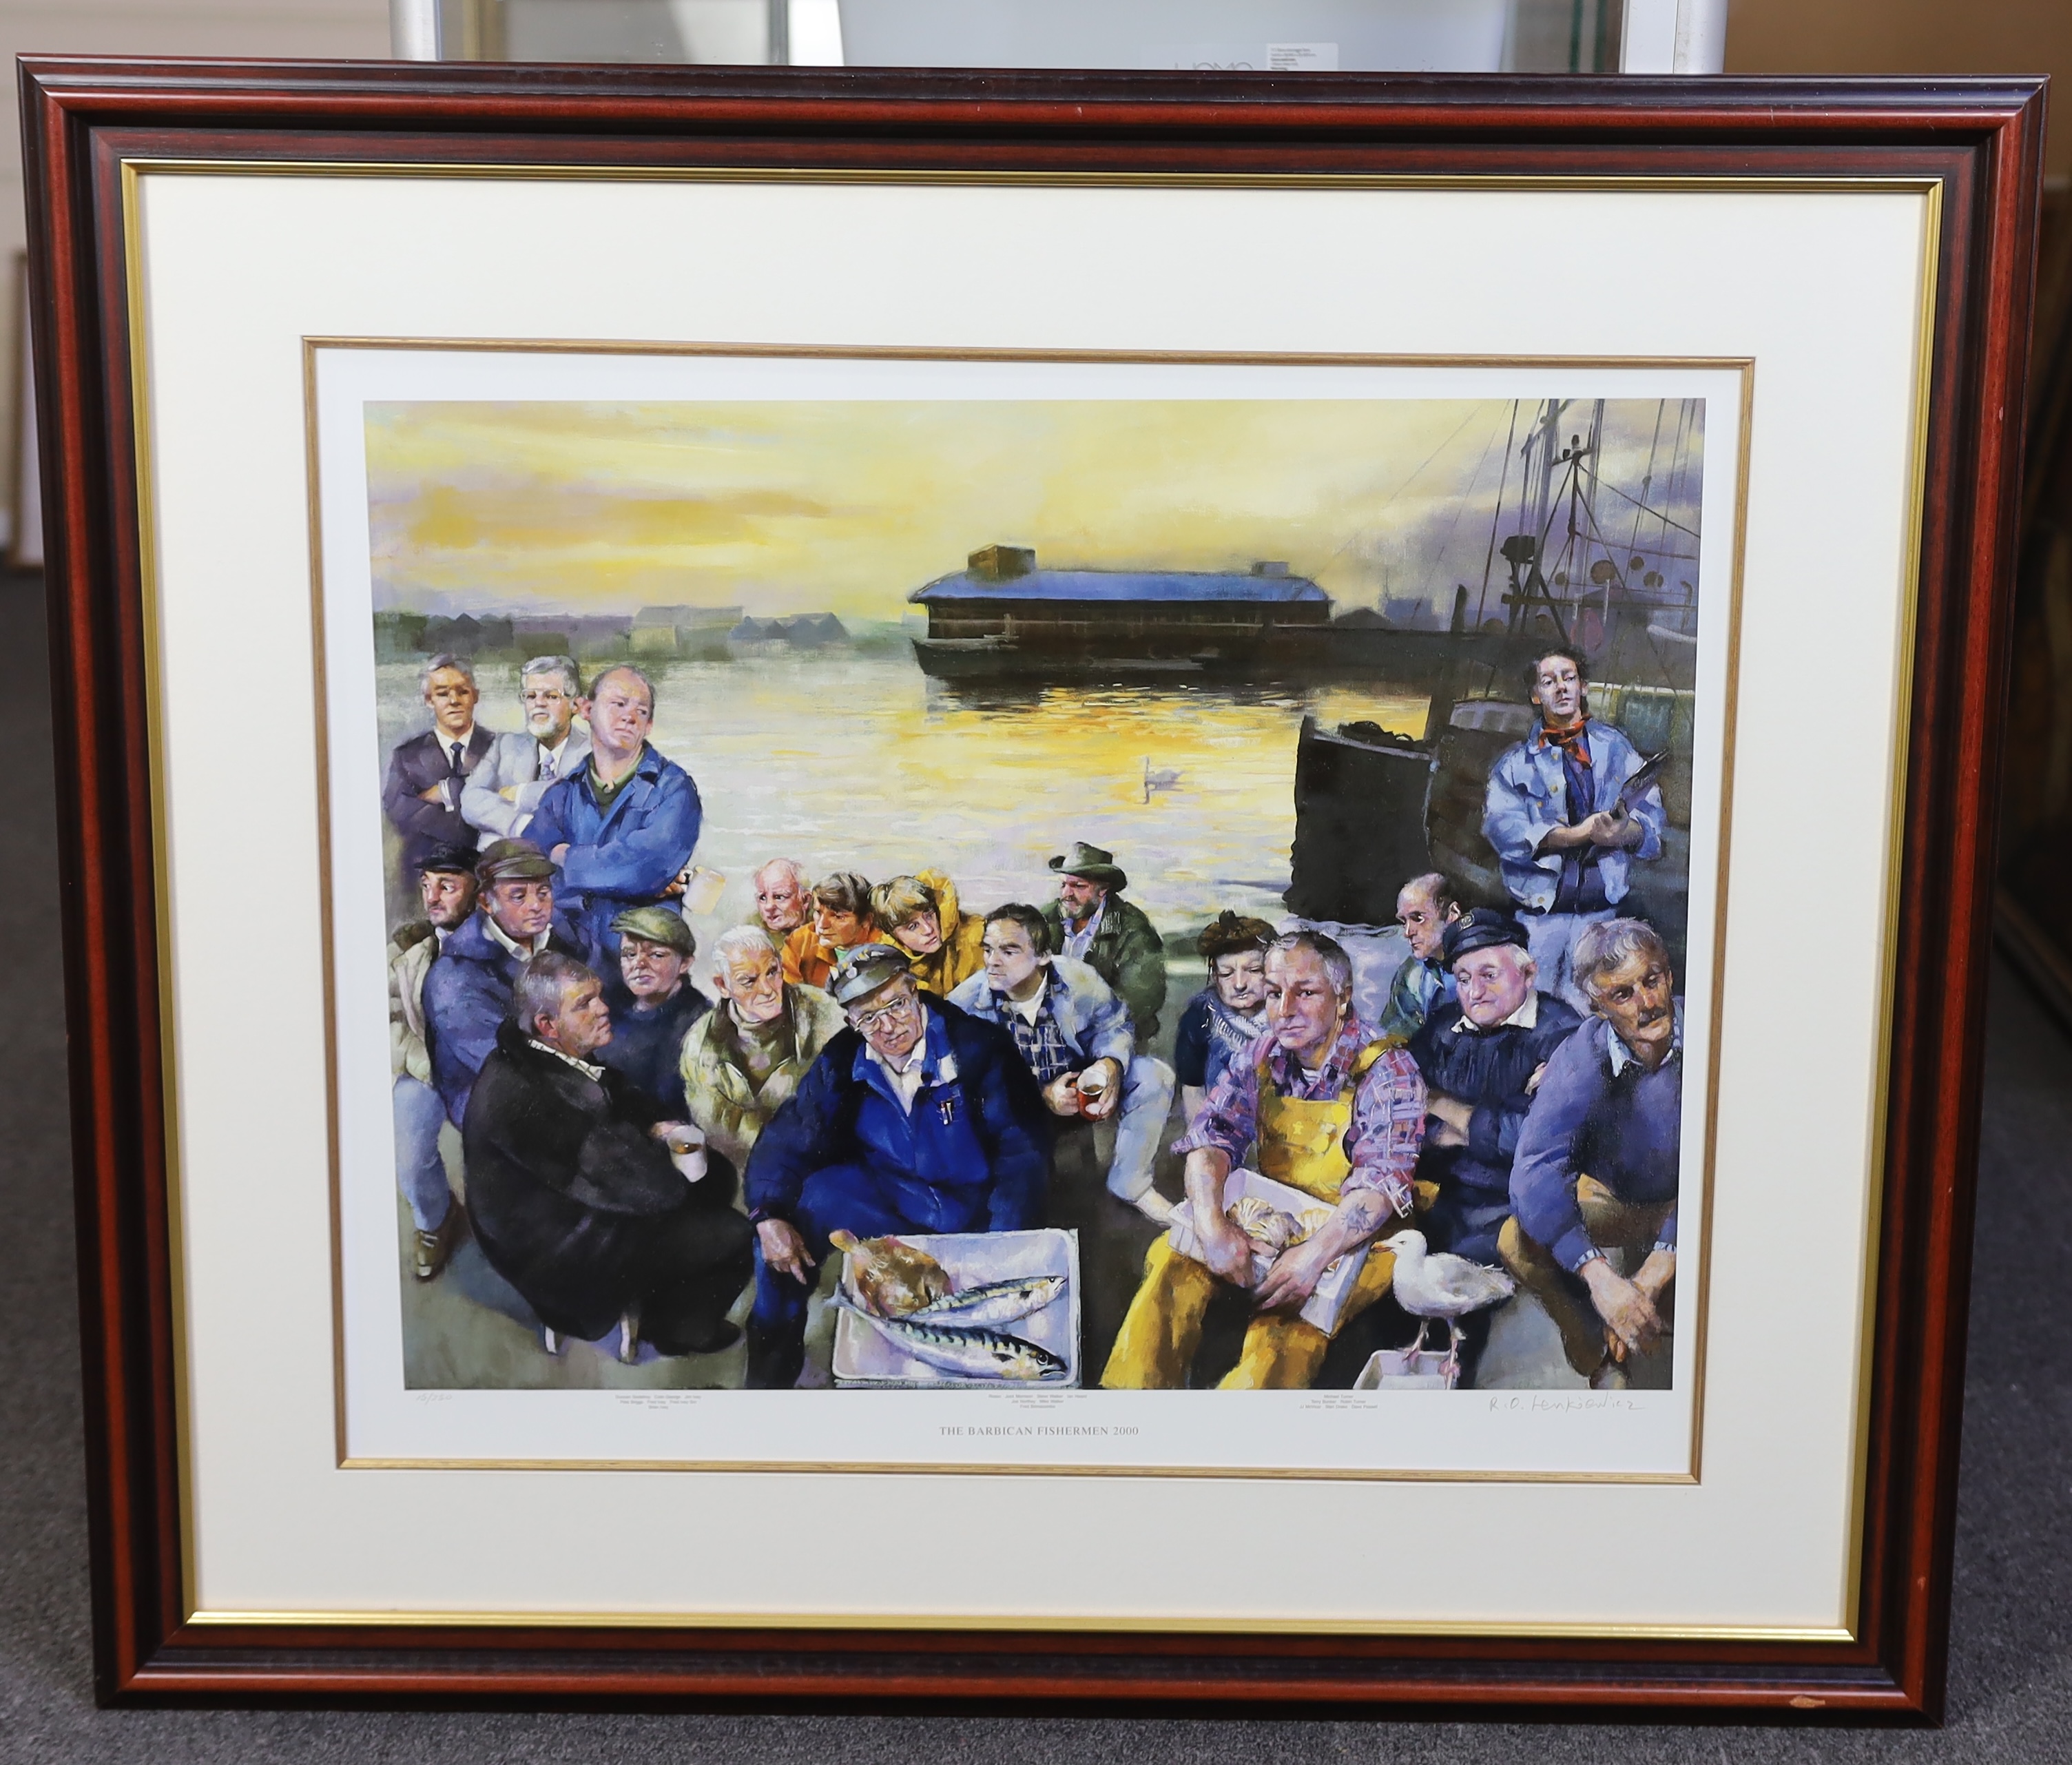 Robert Lenkiewicz (1941-2002), stochastic screened lithograph, 'The Barbican Fishermen 2000', signed in pencil, 15/250, 47 x 60cm. Condition - good